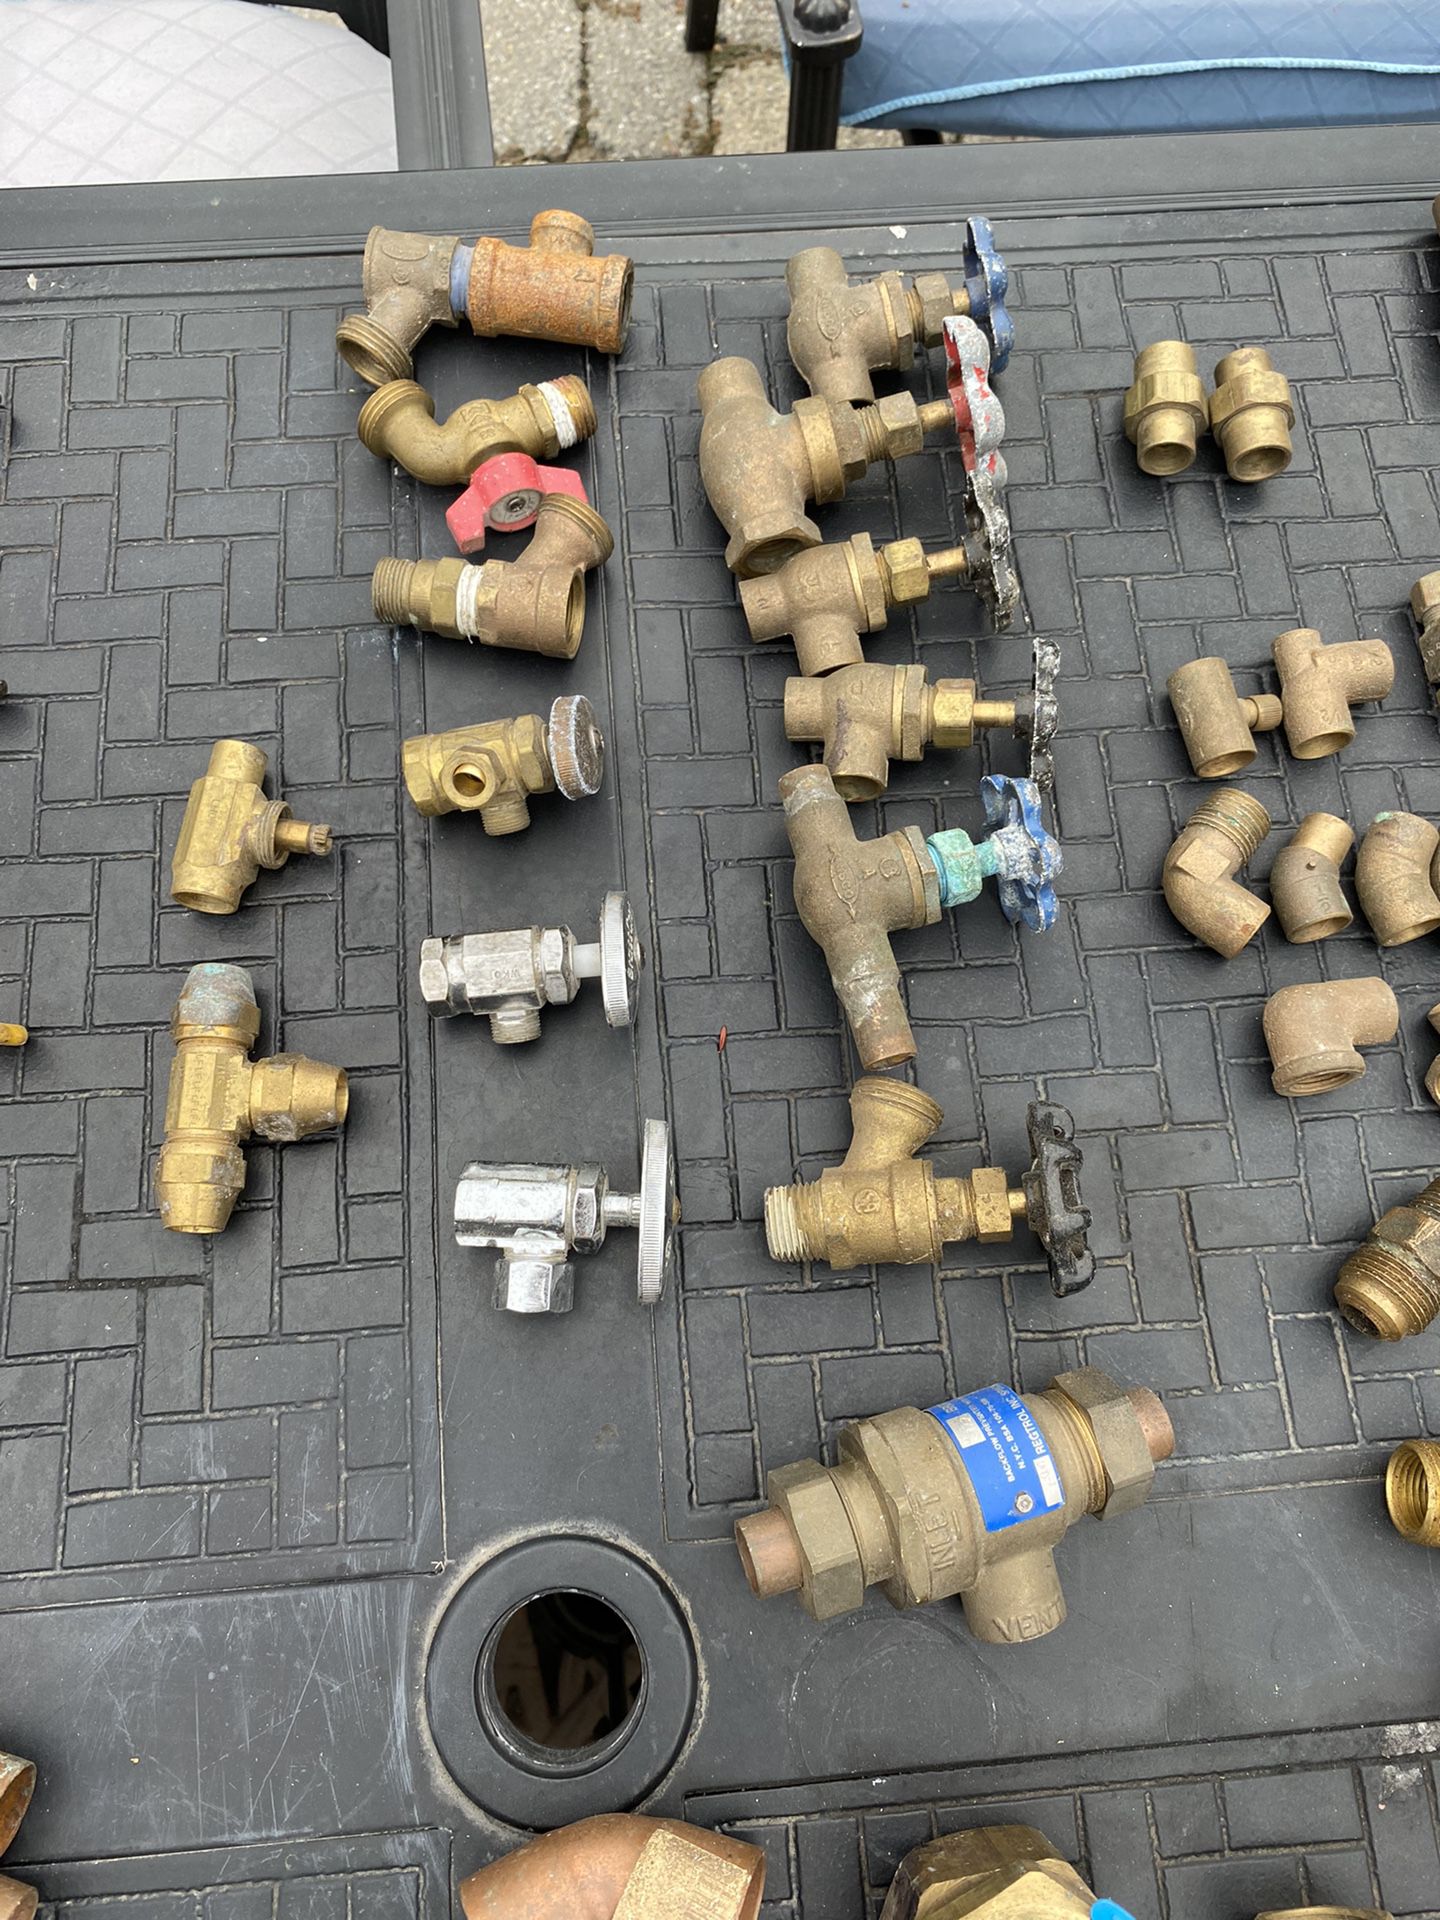 Brass Fittings All For $200